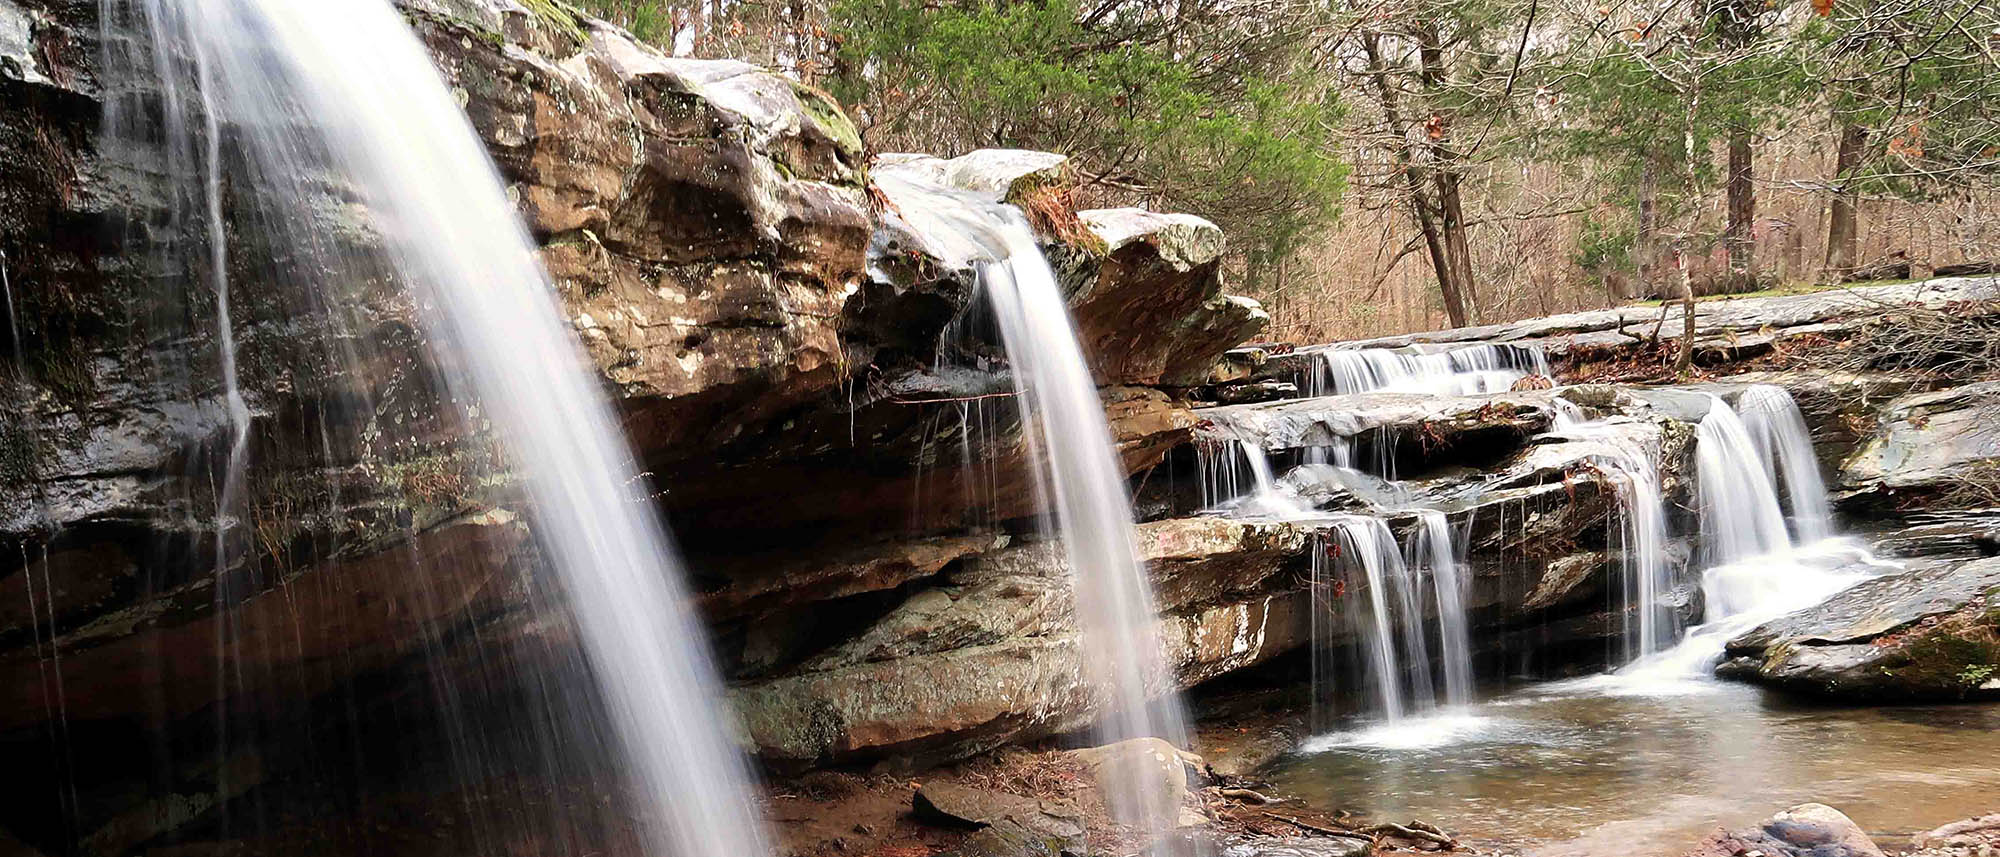 Support Friends of the Shawnee National Forest